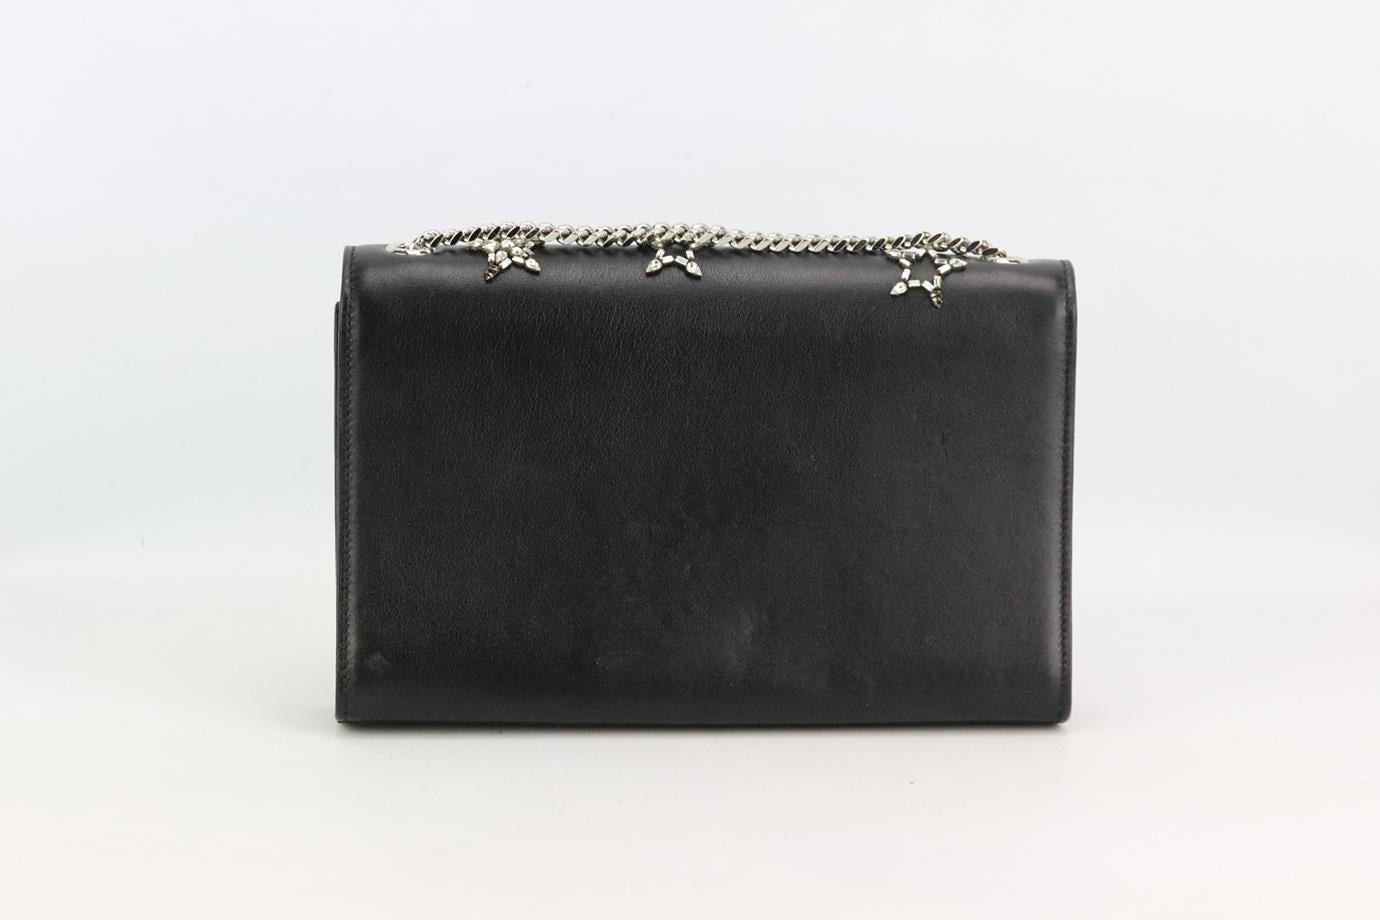 Saint Laurent Kate Monogramme Medium embellished leather shoulder bag. Made from black leather with crystal-embellishment in the shape of stars and finished with silver-tone hardware, it has a large interior compartment. Black. Magnetic fastening at